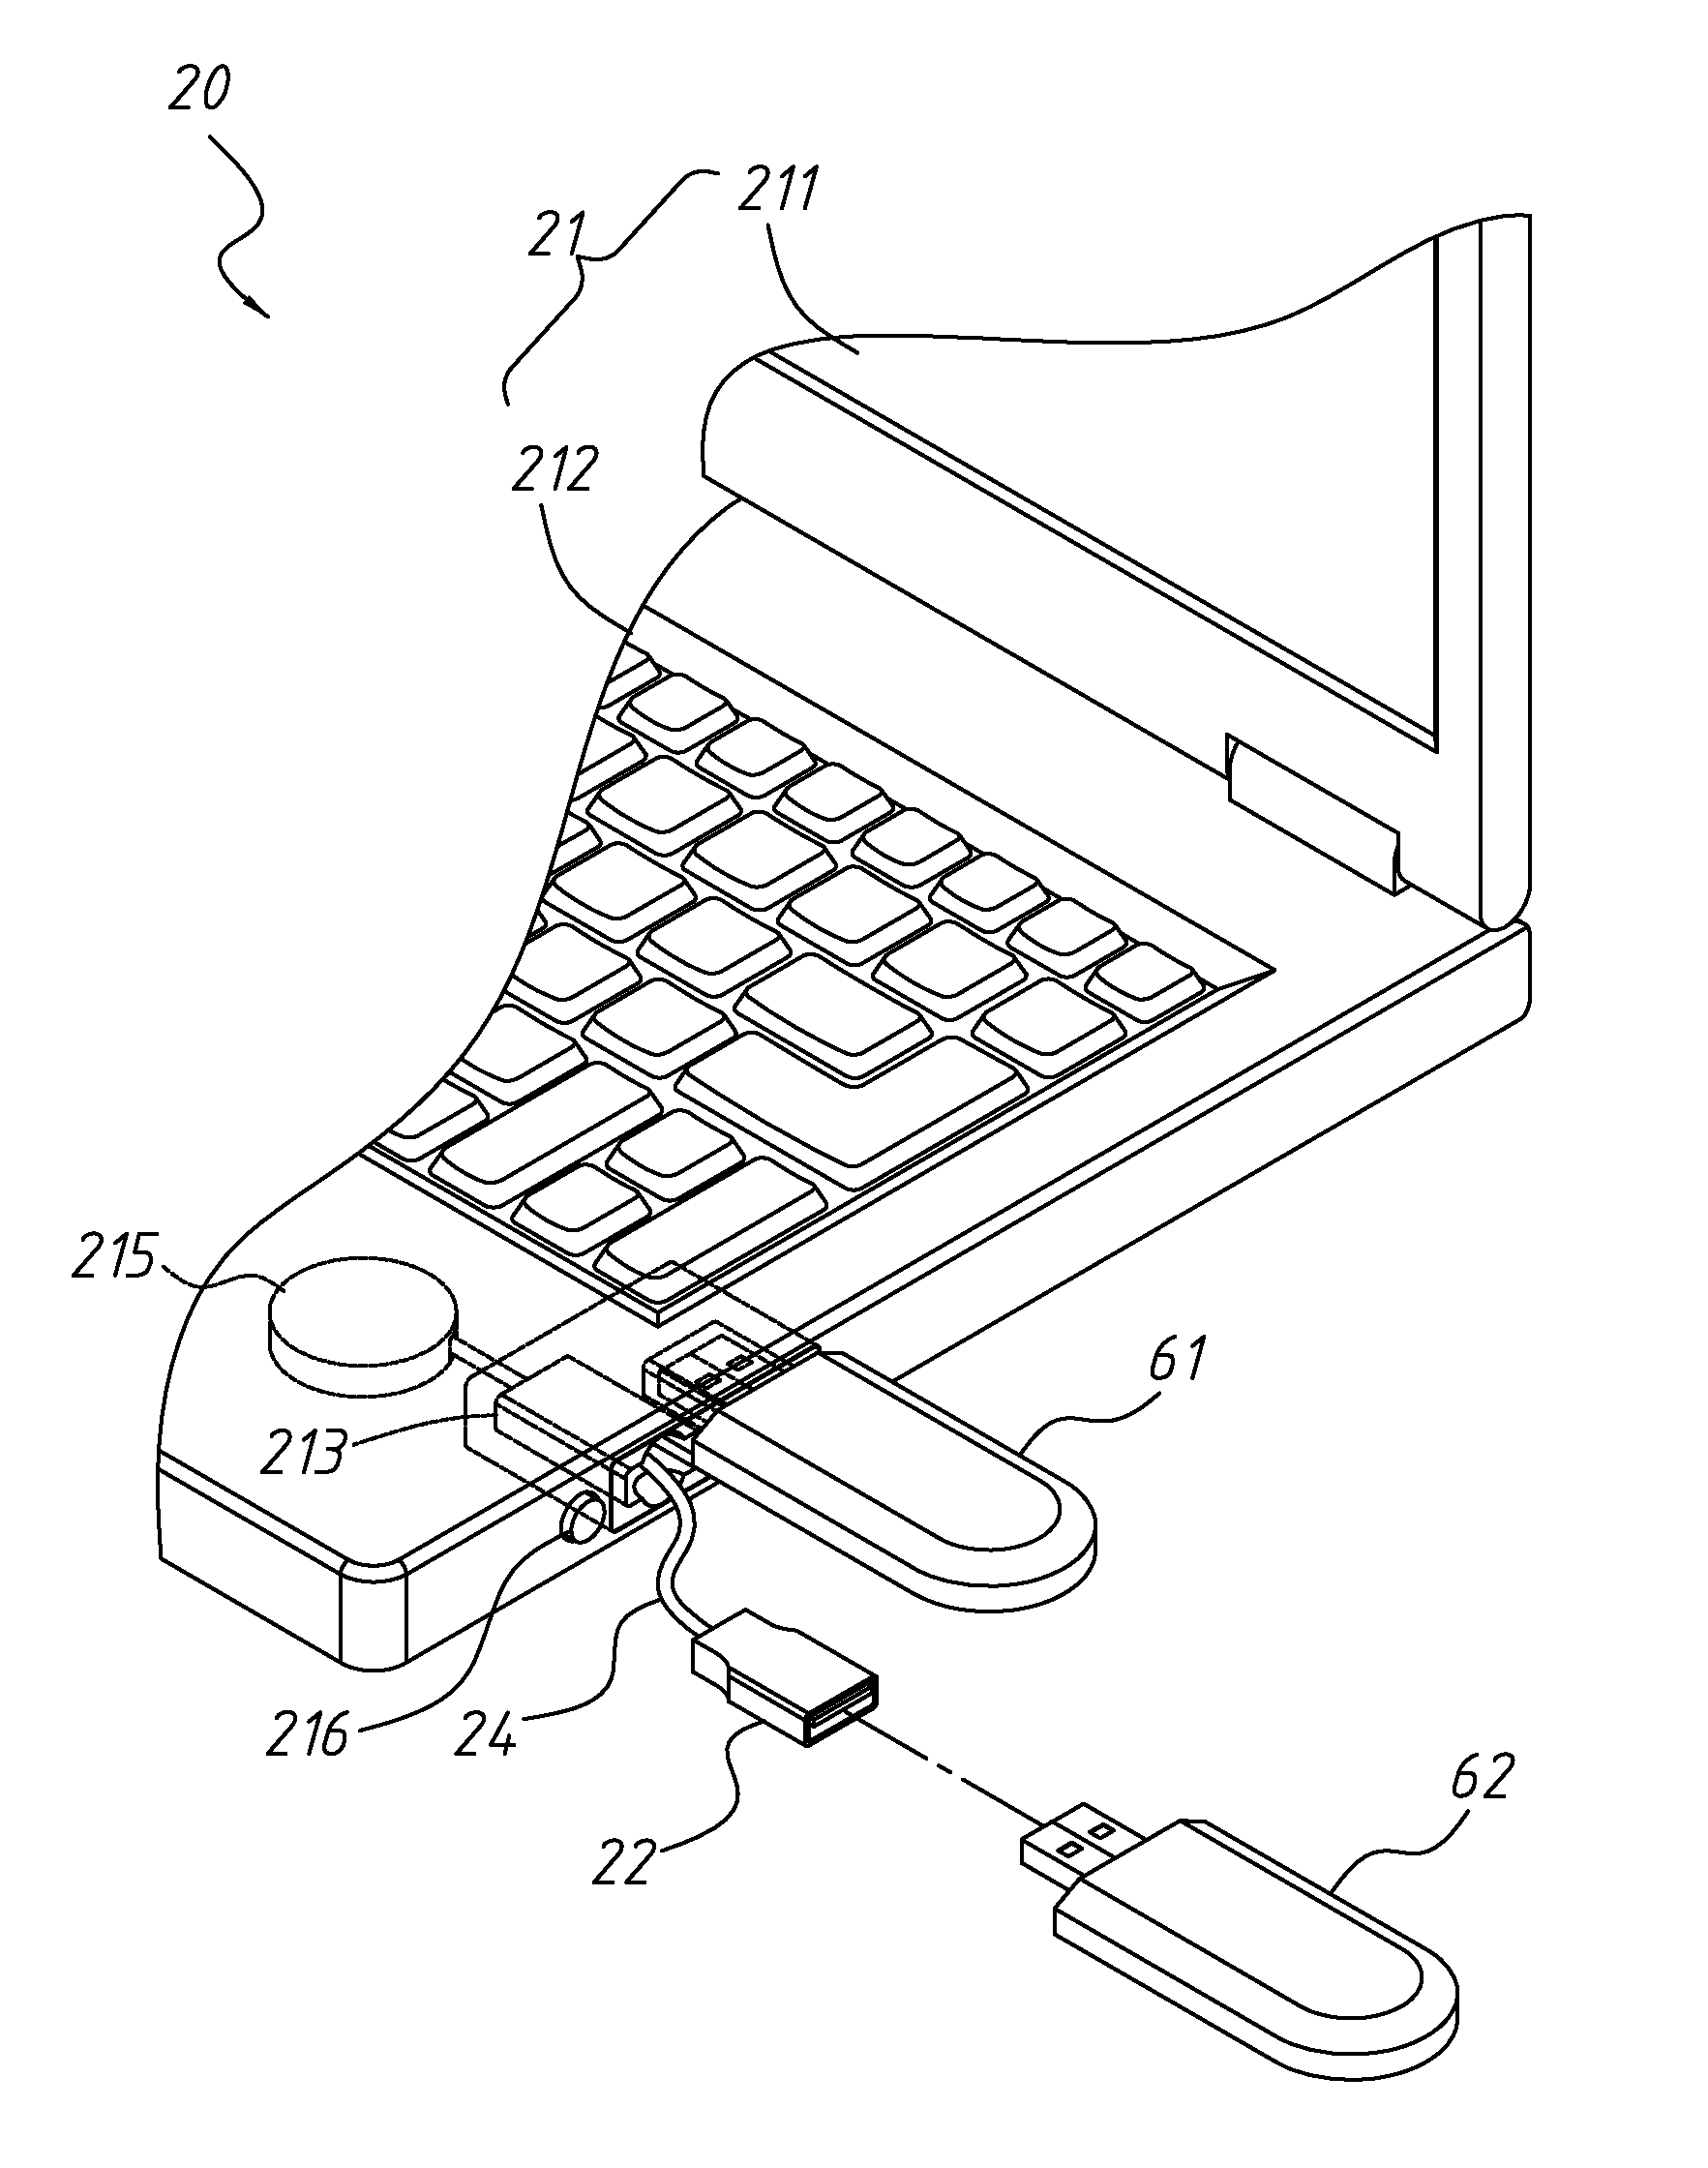 Electronic device with stretchable USB receptacle